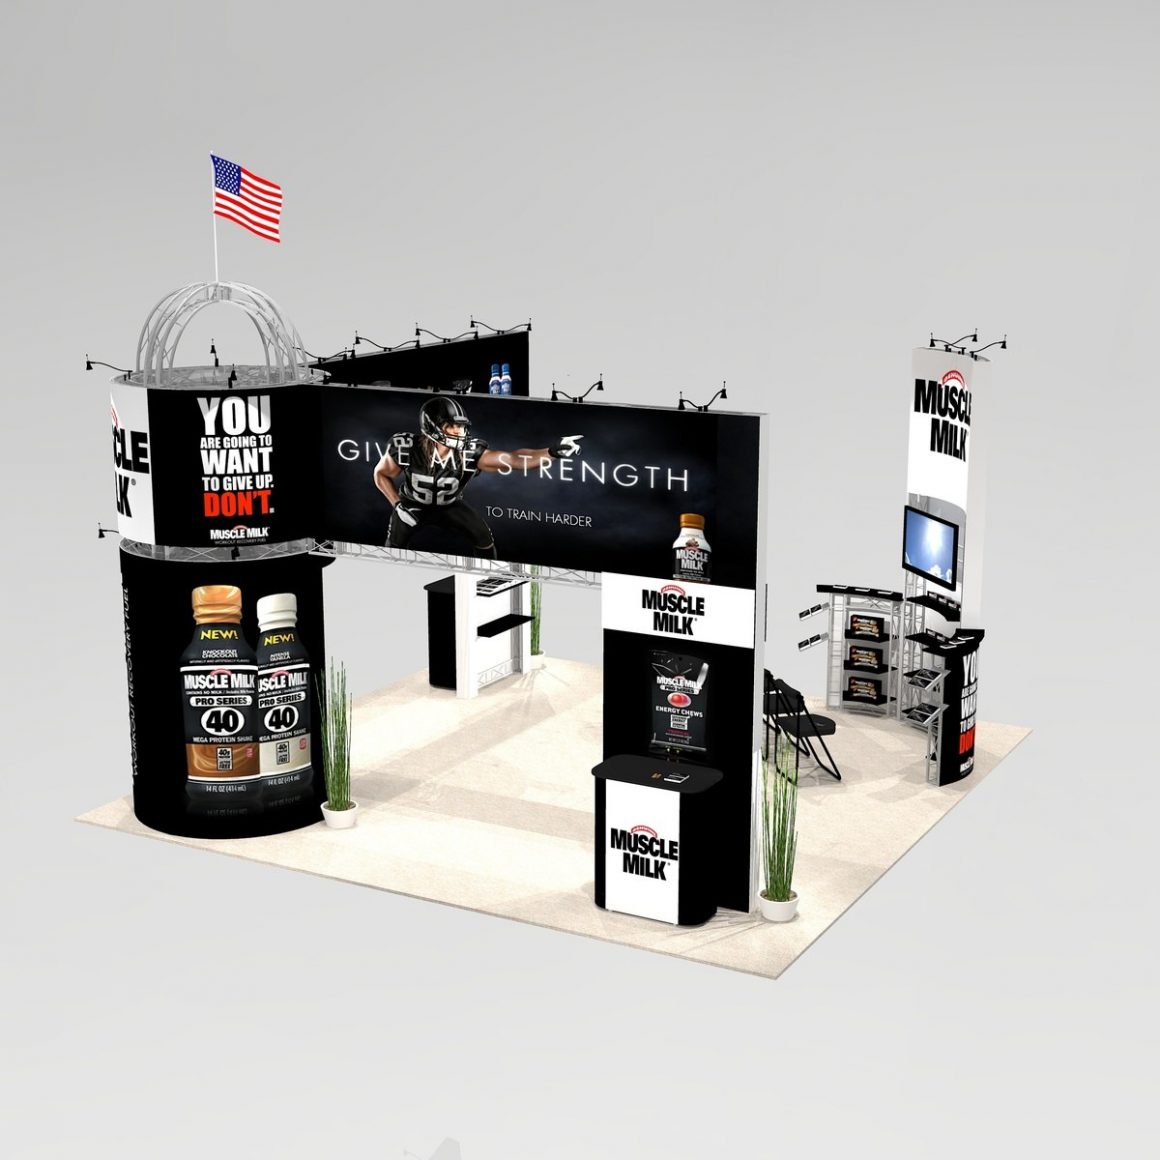 Trade show exhibit design featuring domed tower and ample seating with product display CHI2020 Graphic Package C